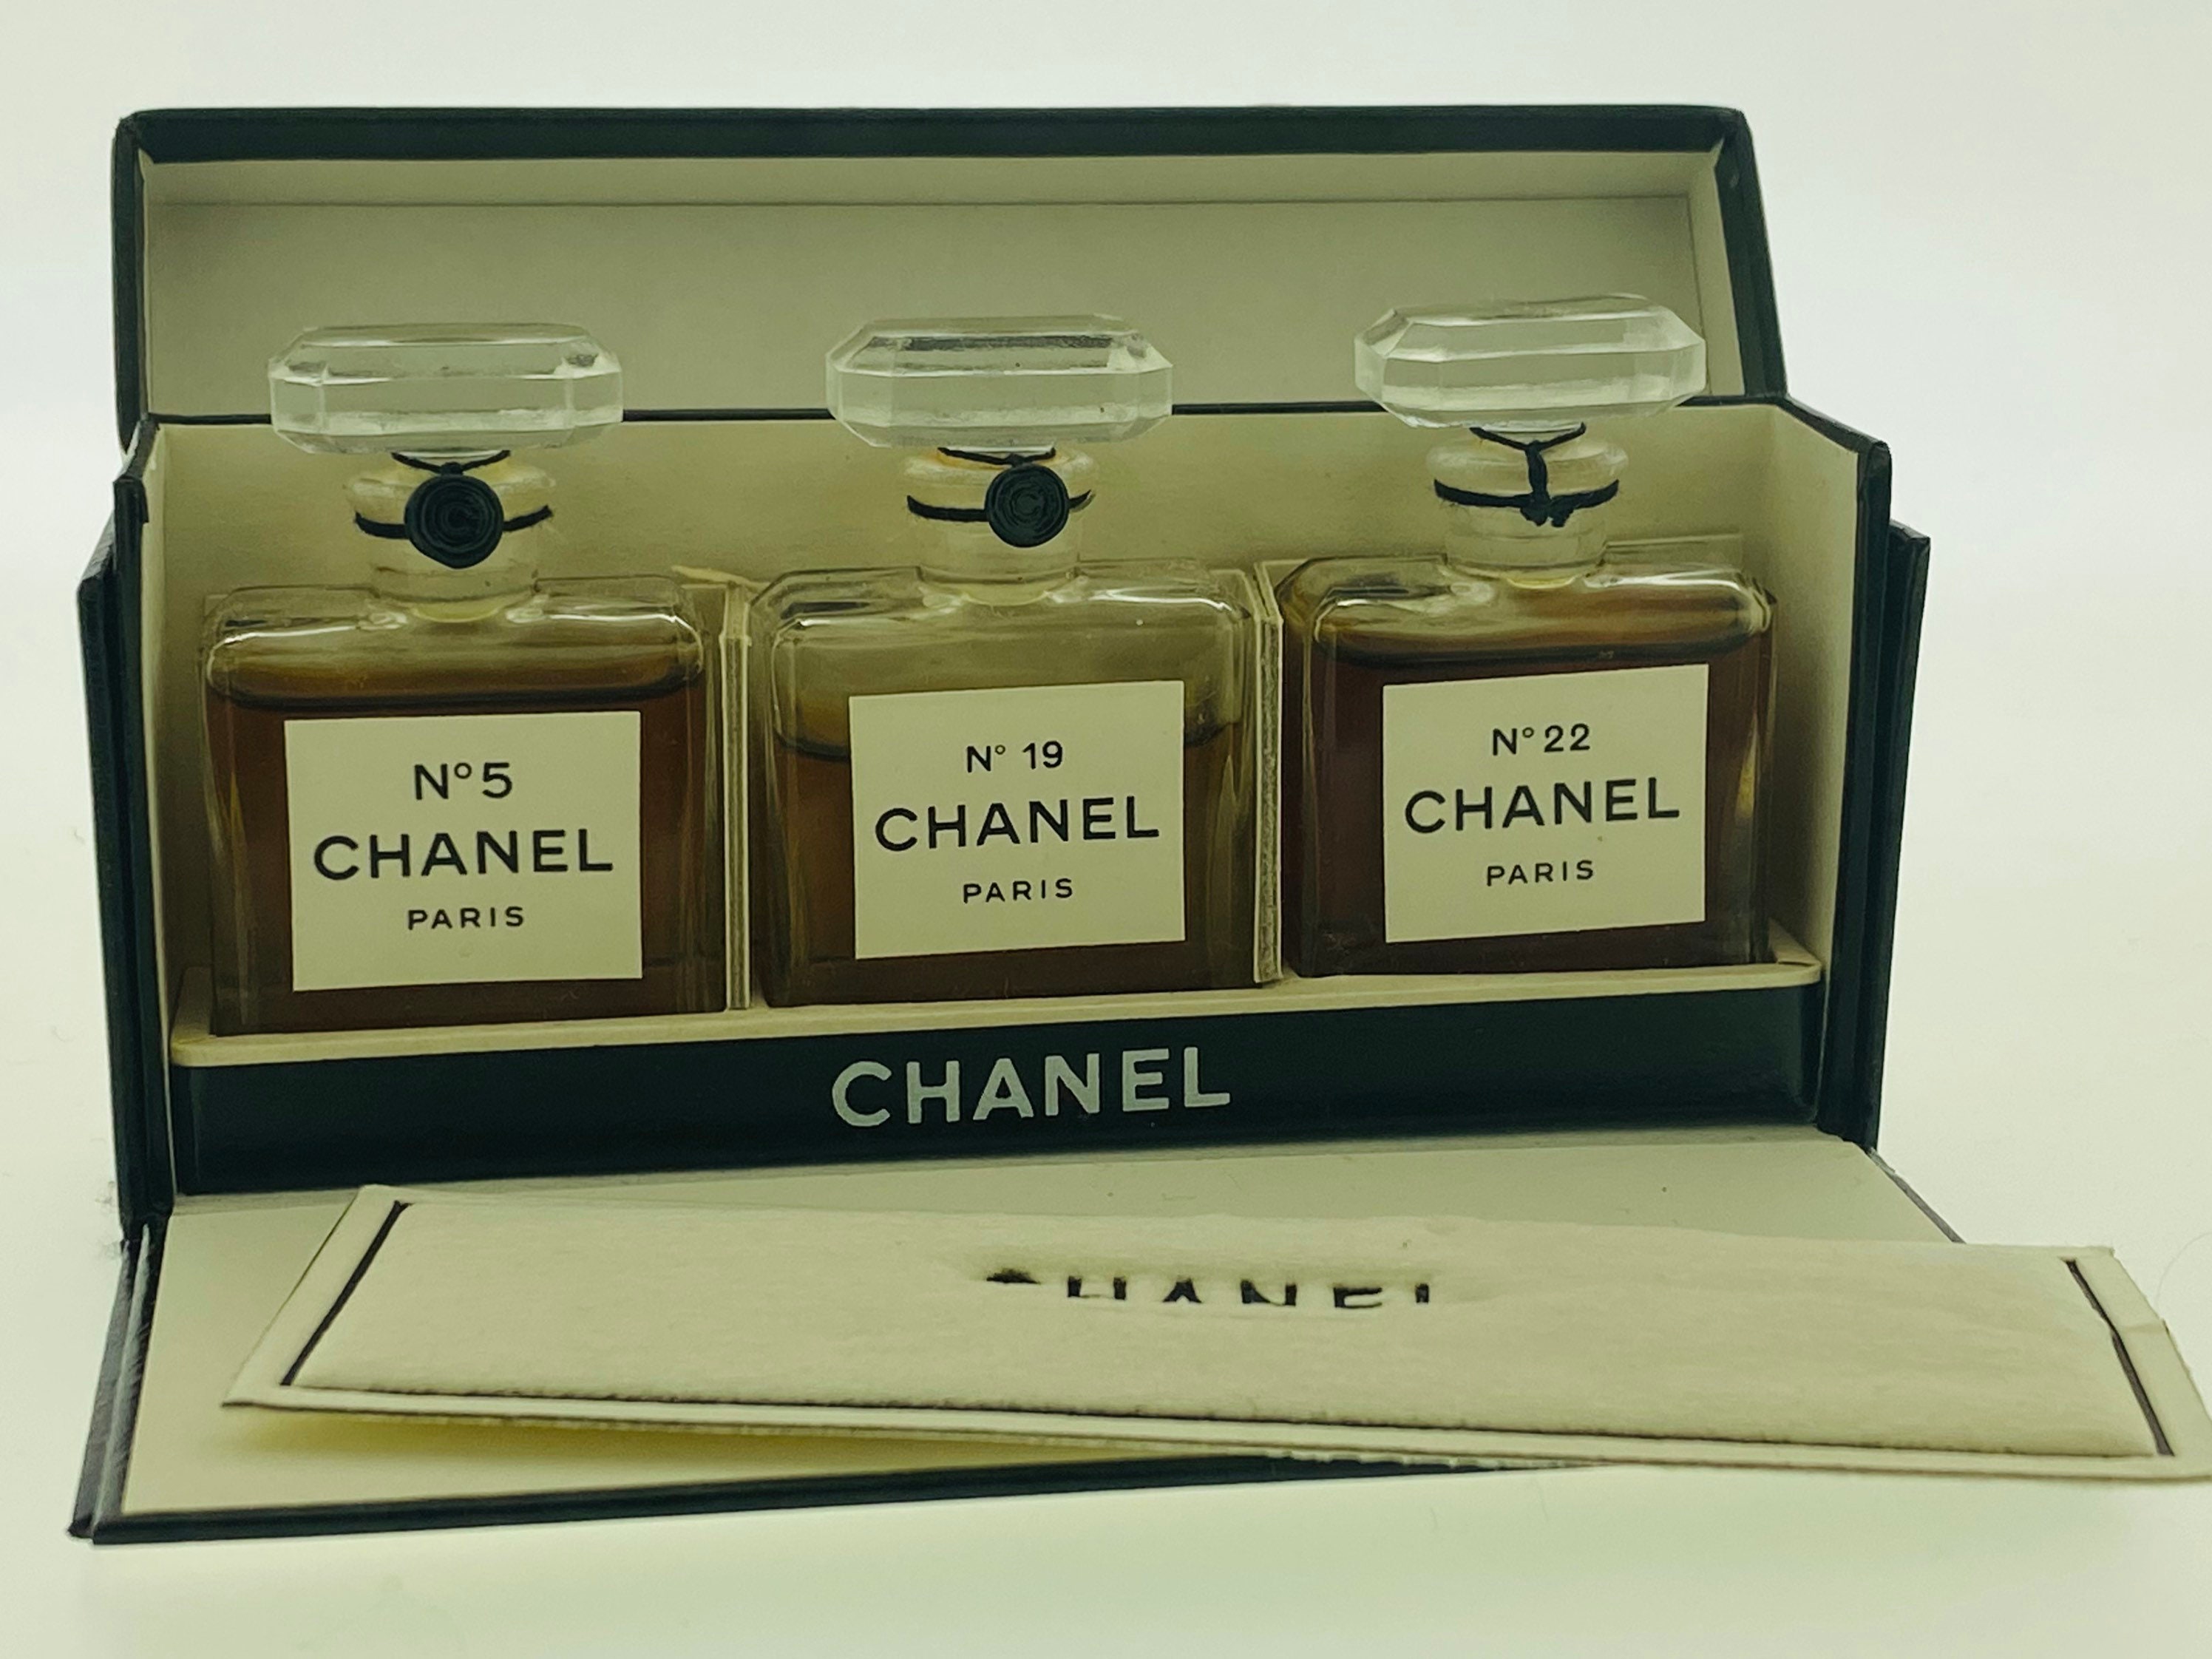 Chanel Perfume 12-piece travel suit for Sale in Elma, NY - OfferUp